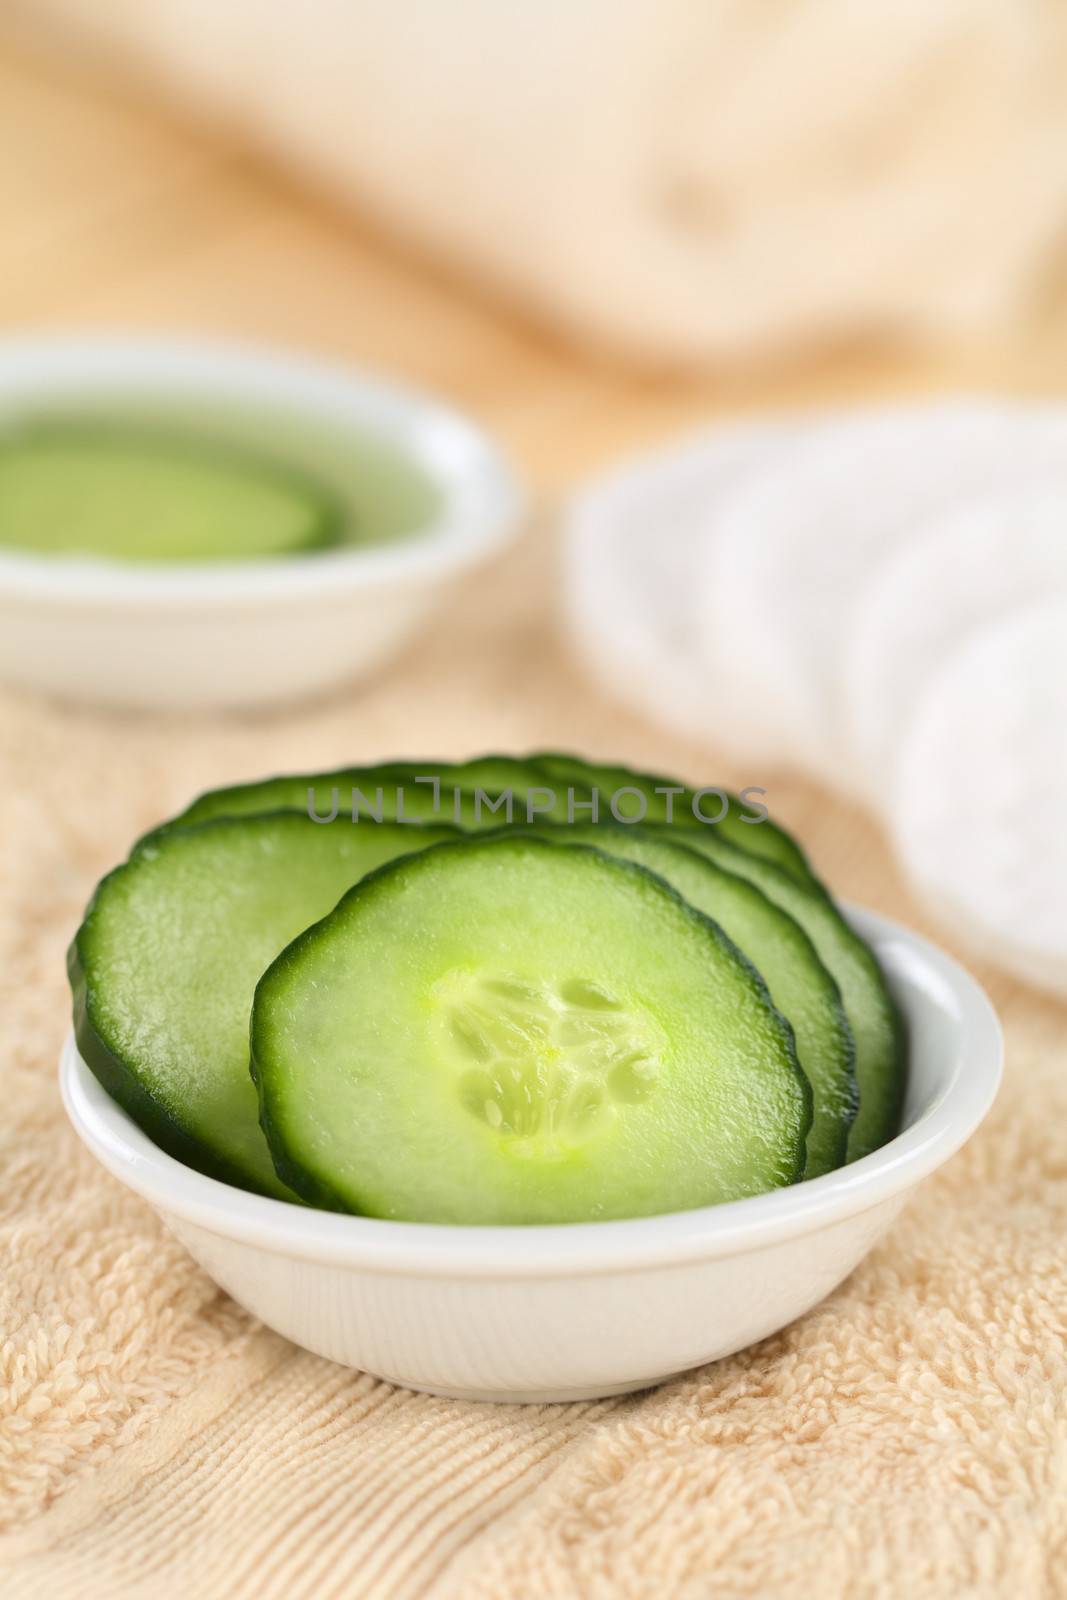 Cucumber Slices as Natural Moisturizer by ildi